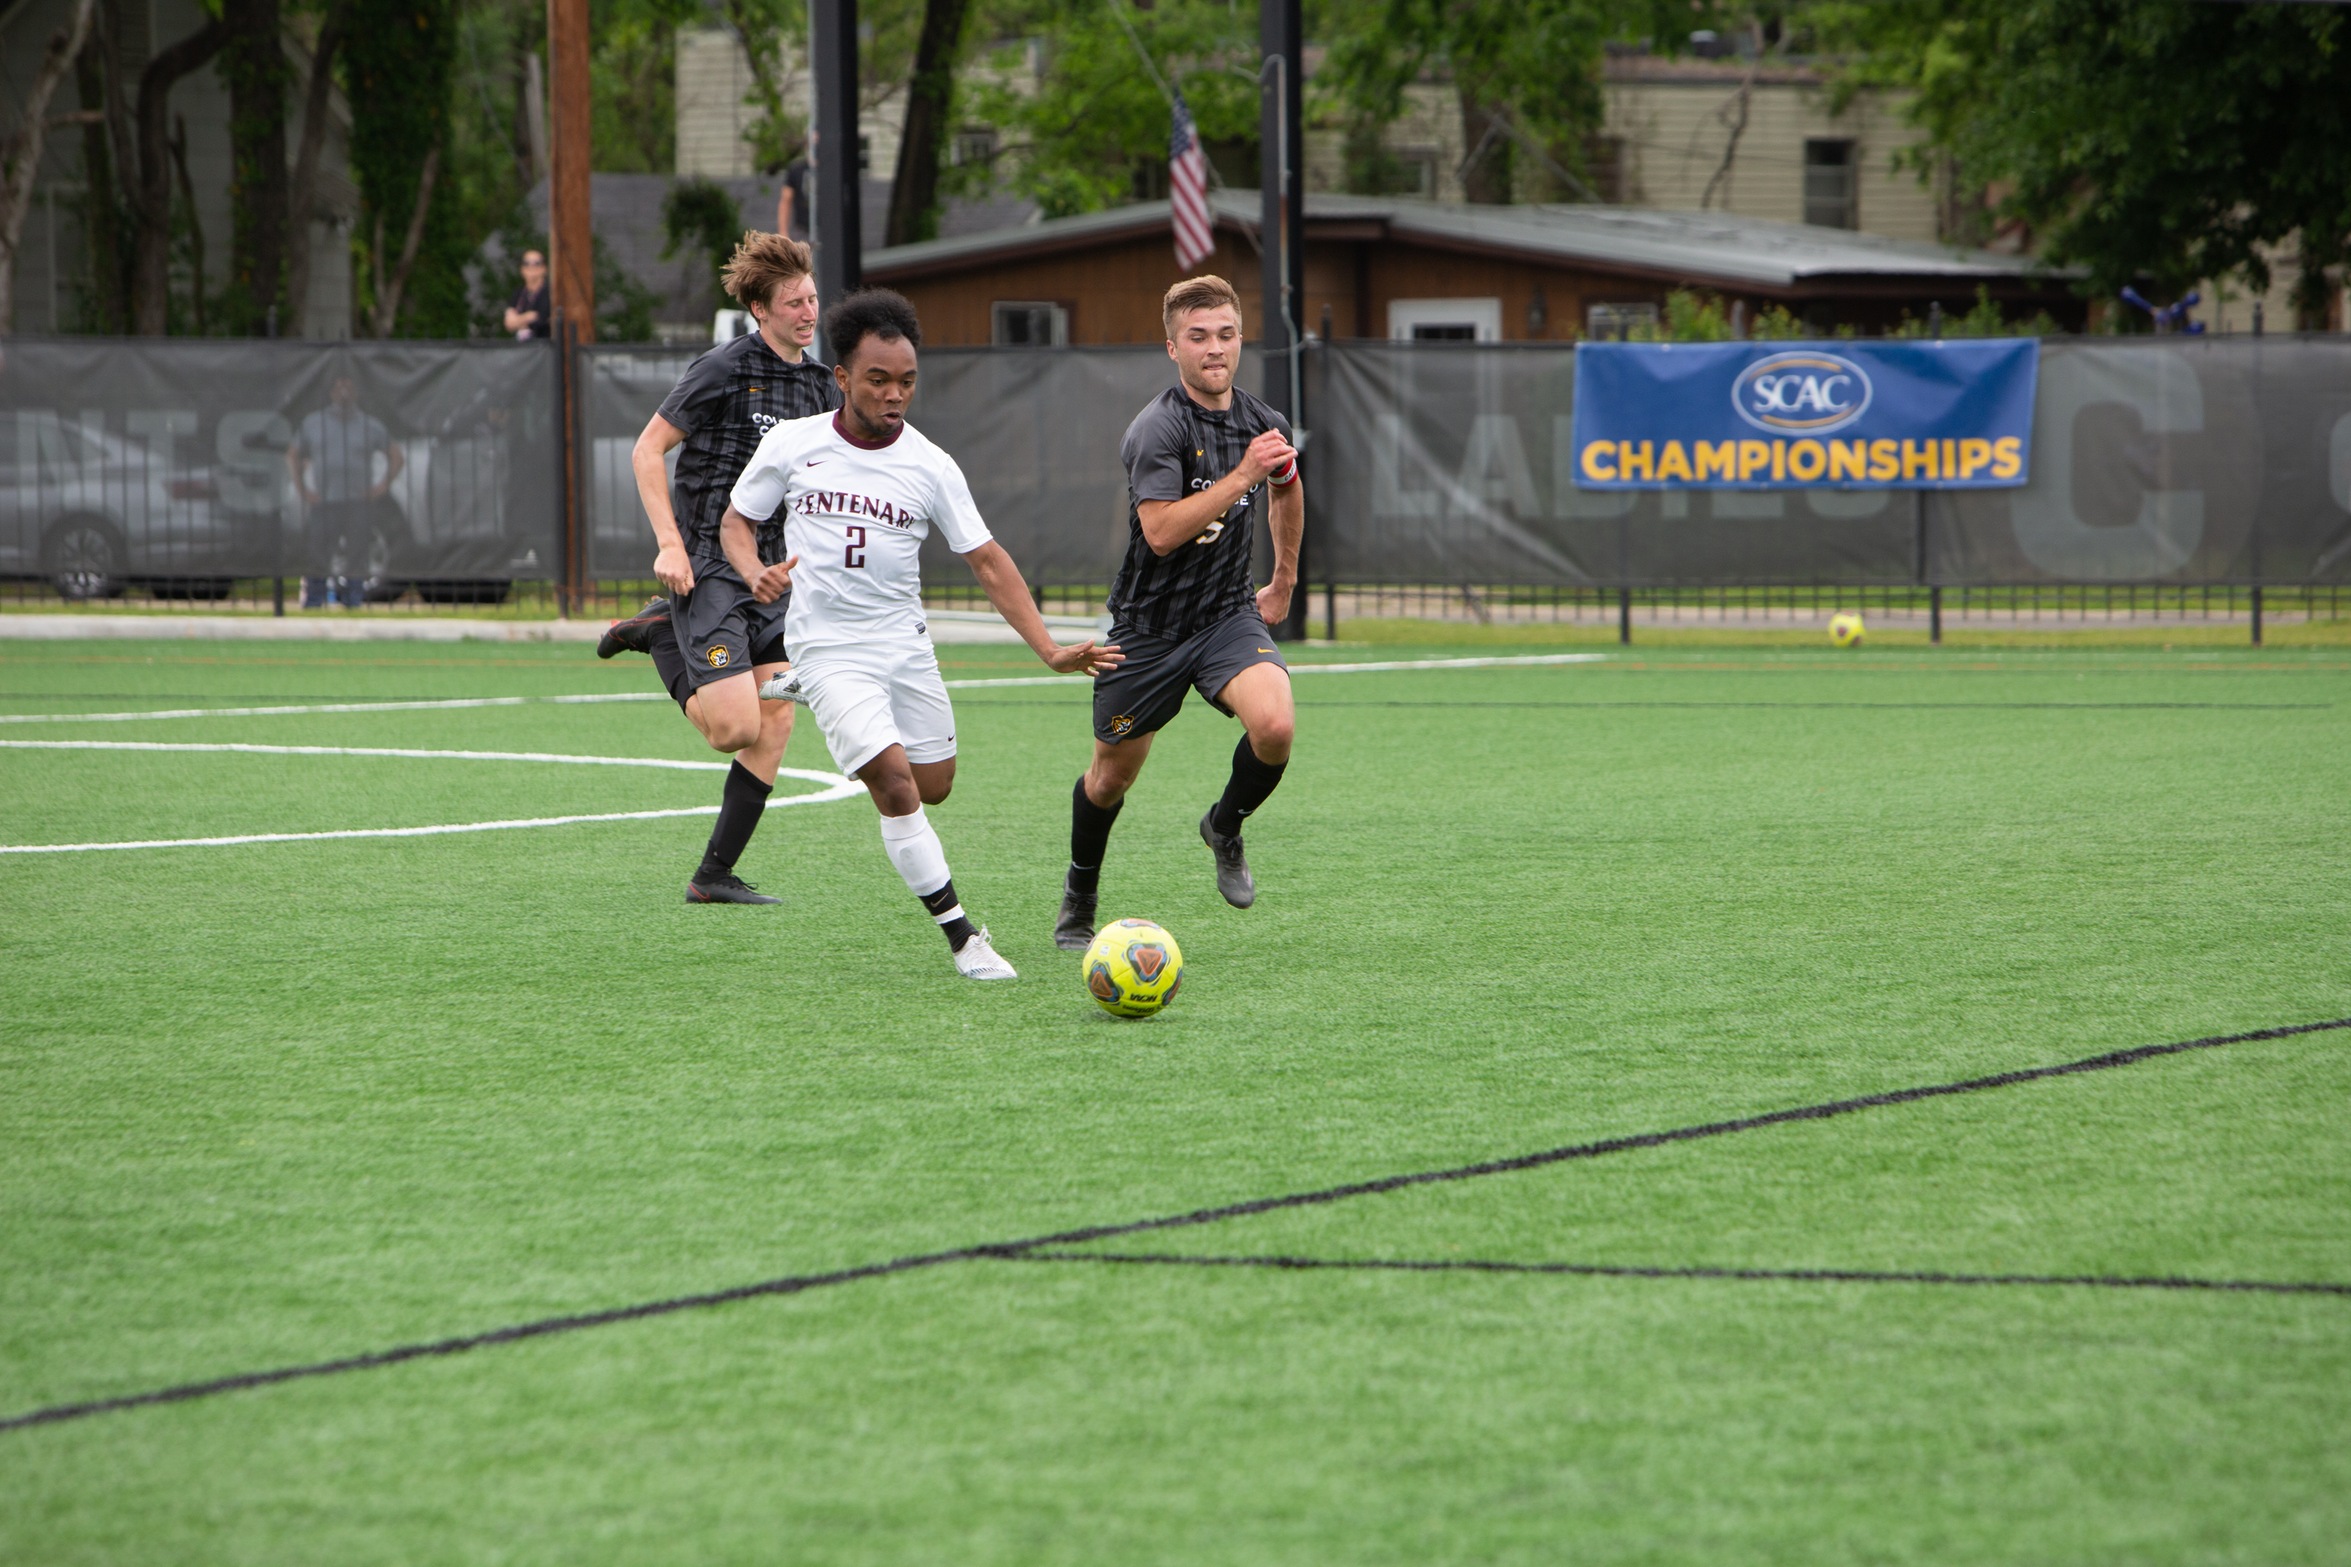 Gents Record Landmark Victory On Friday In SCAC Quarterfinals Over Colorado College